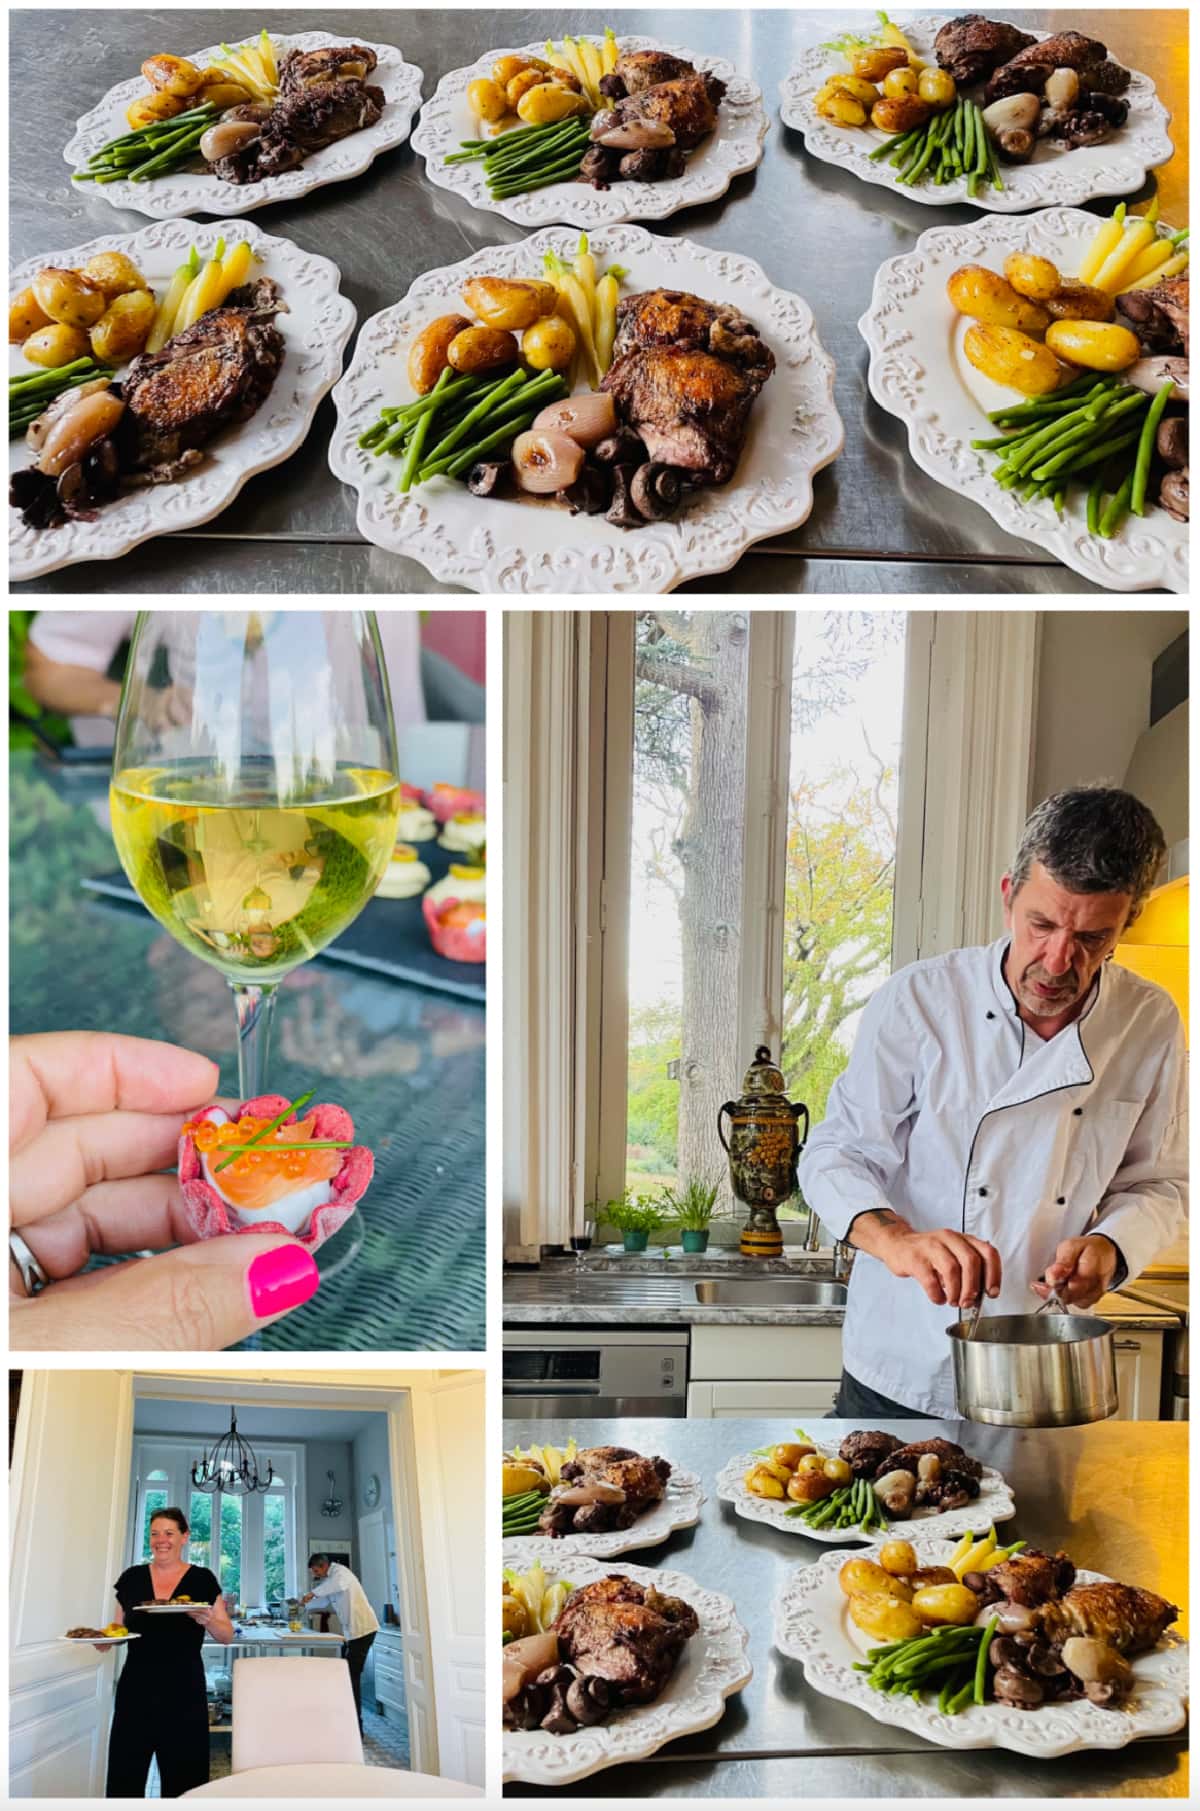 private chef dinner collage at chateau de valcreuse